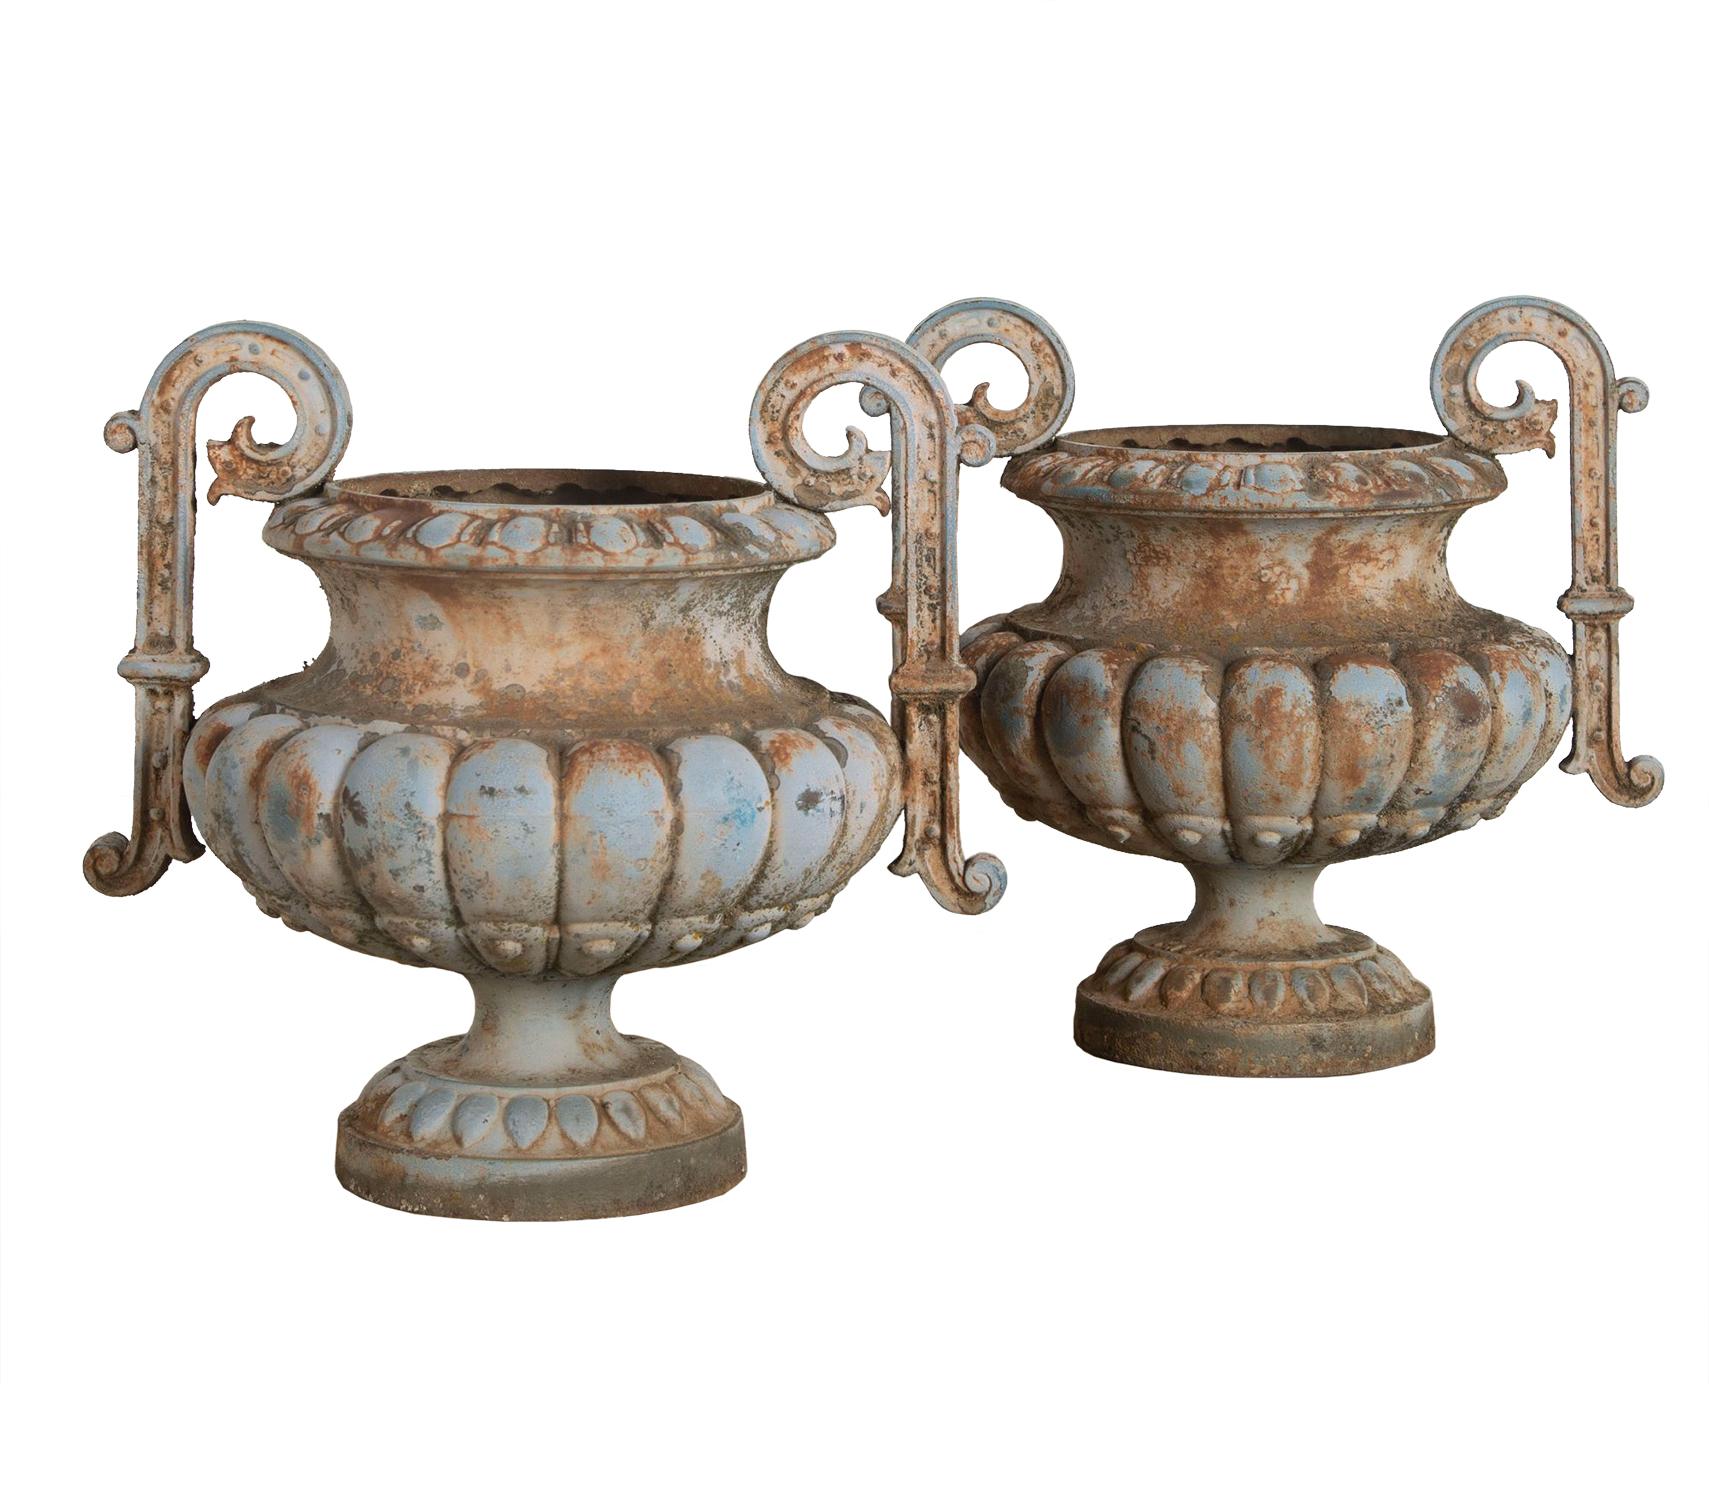 Decorative pair of late 19th century garden urns with superb pale blue patina.